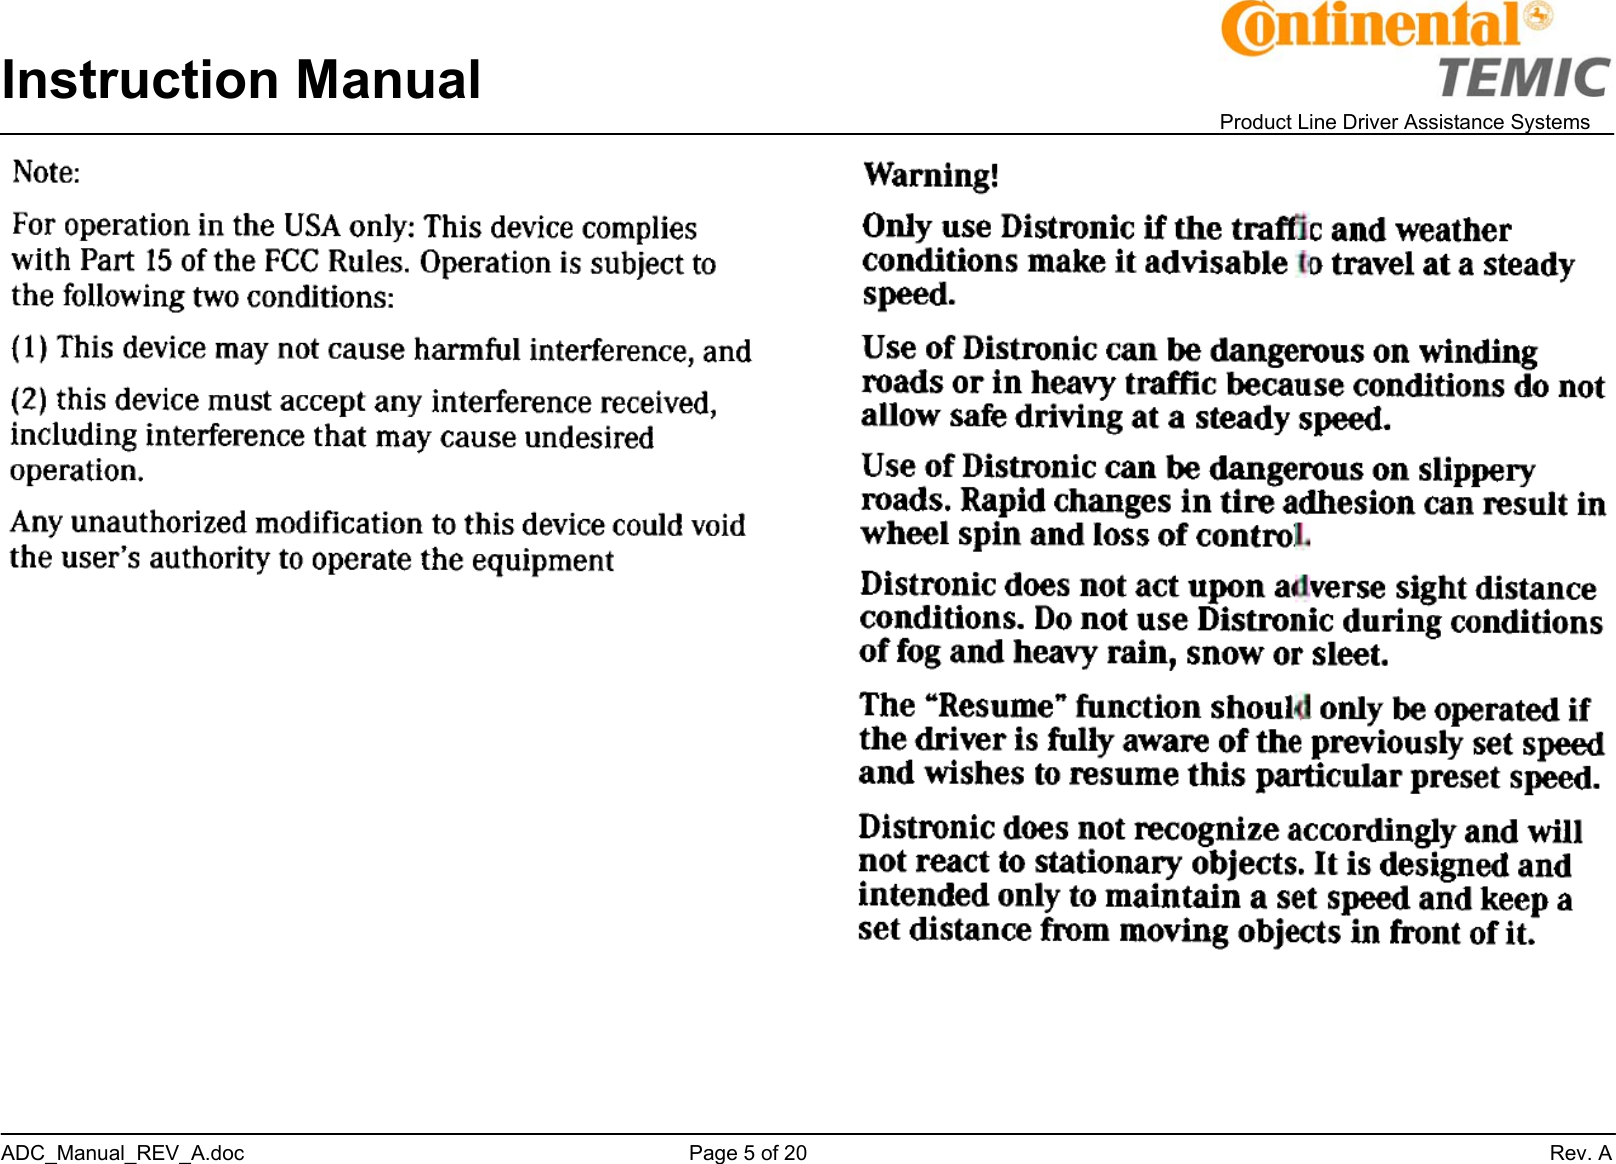 Instruction Manual    Product Line Driver Assistance Systems ADC_Manual_REV_A.doc     Page 5 of 20                 Rev. A   